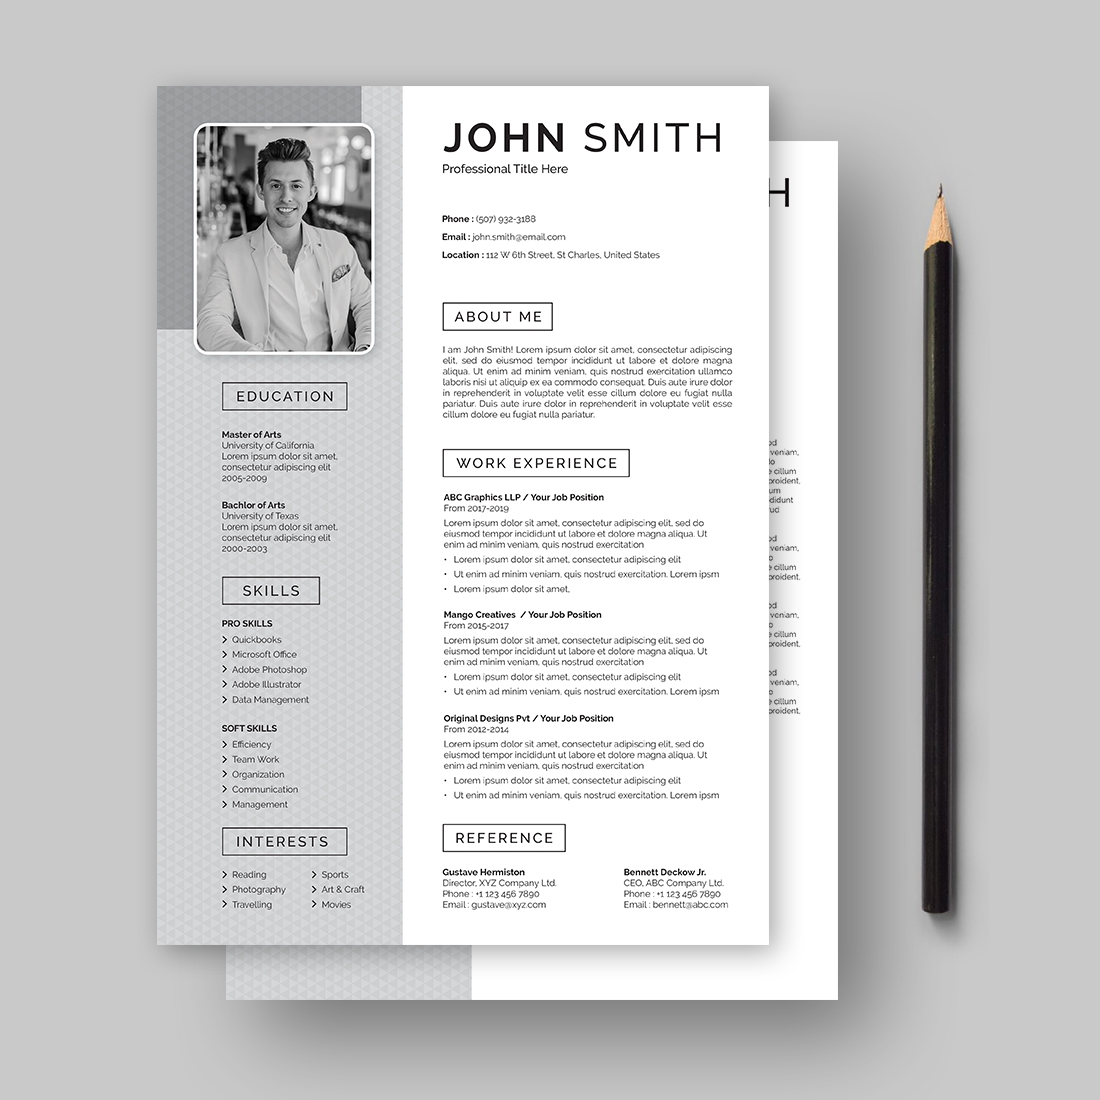 Resume & CV Template cover image.